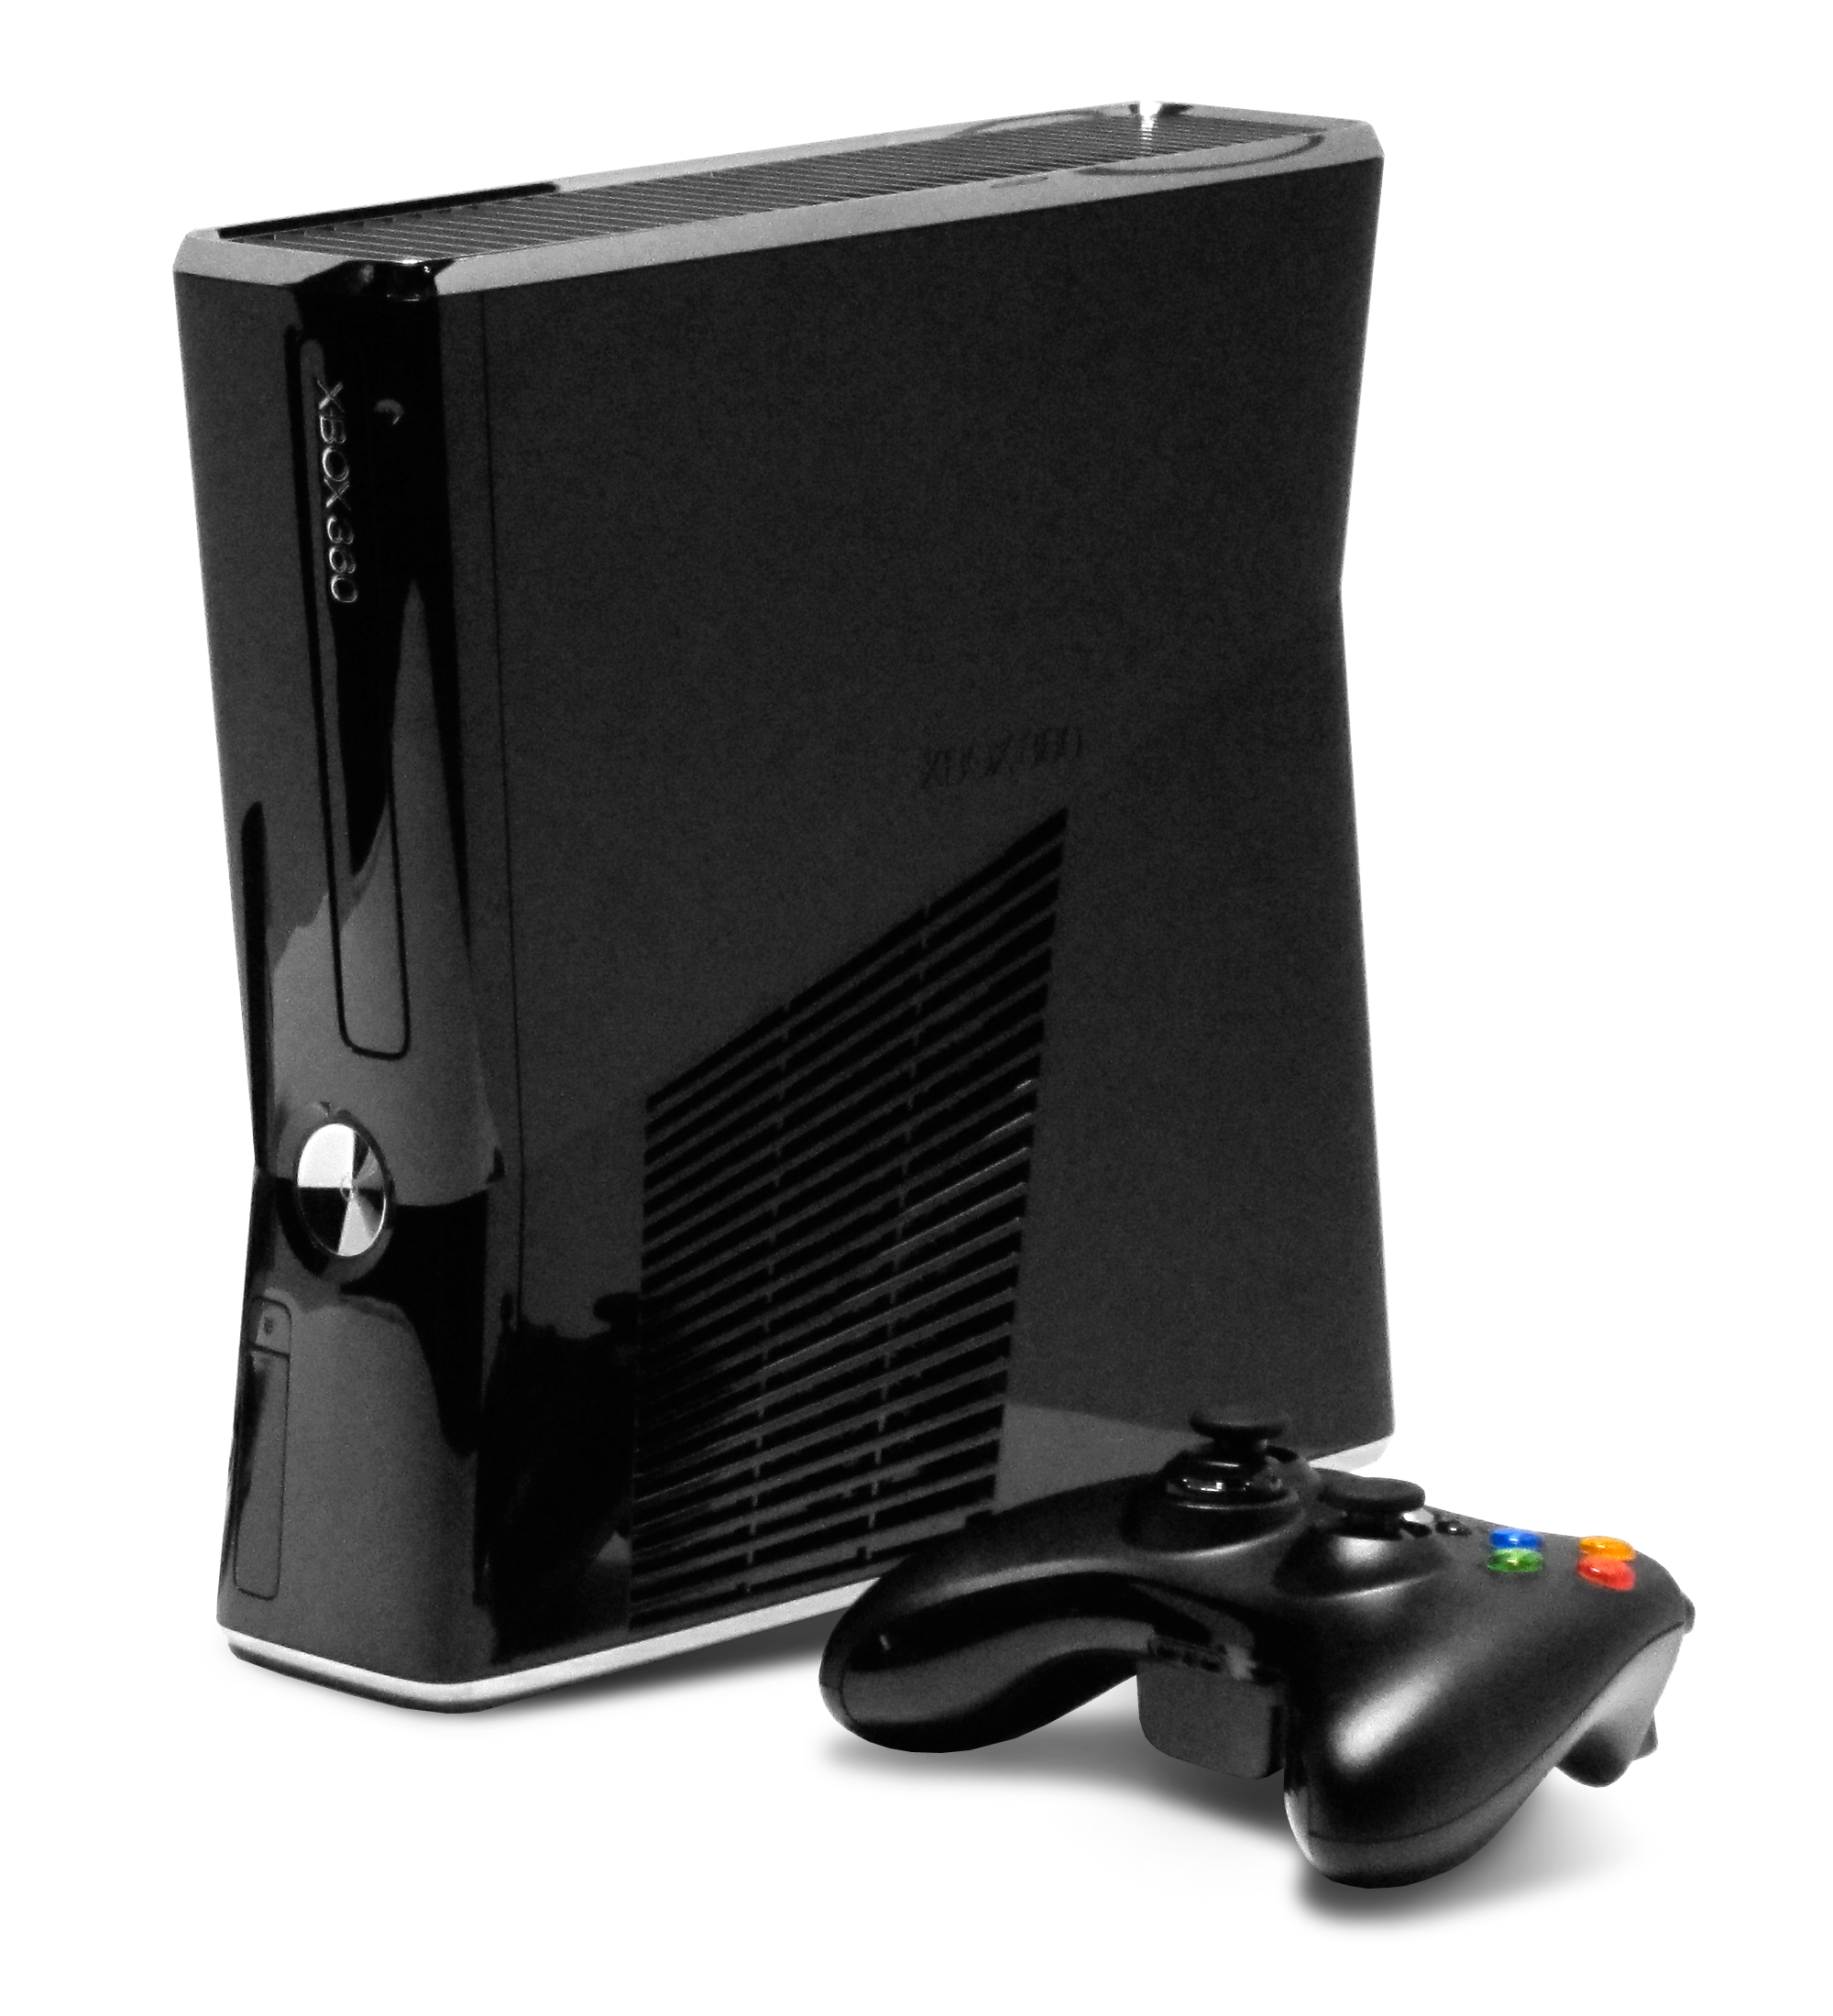 Xbox PNG Pic